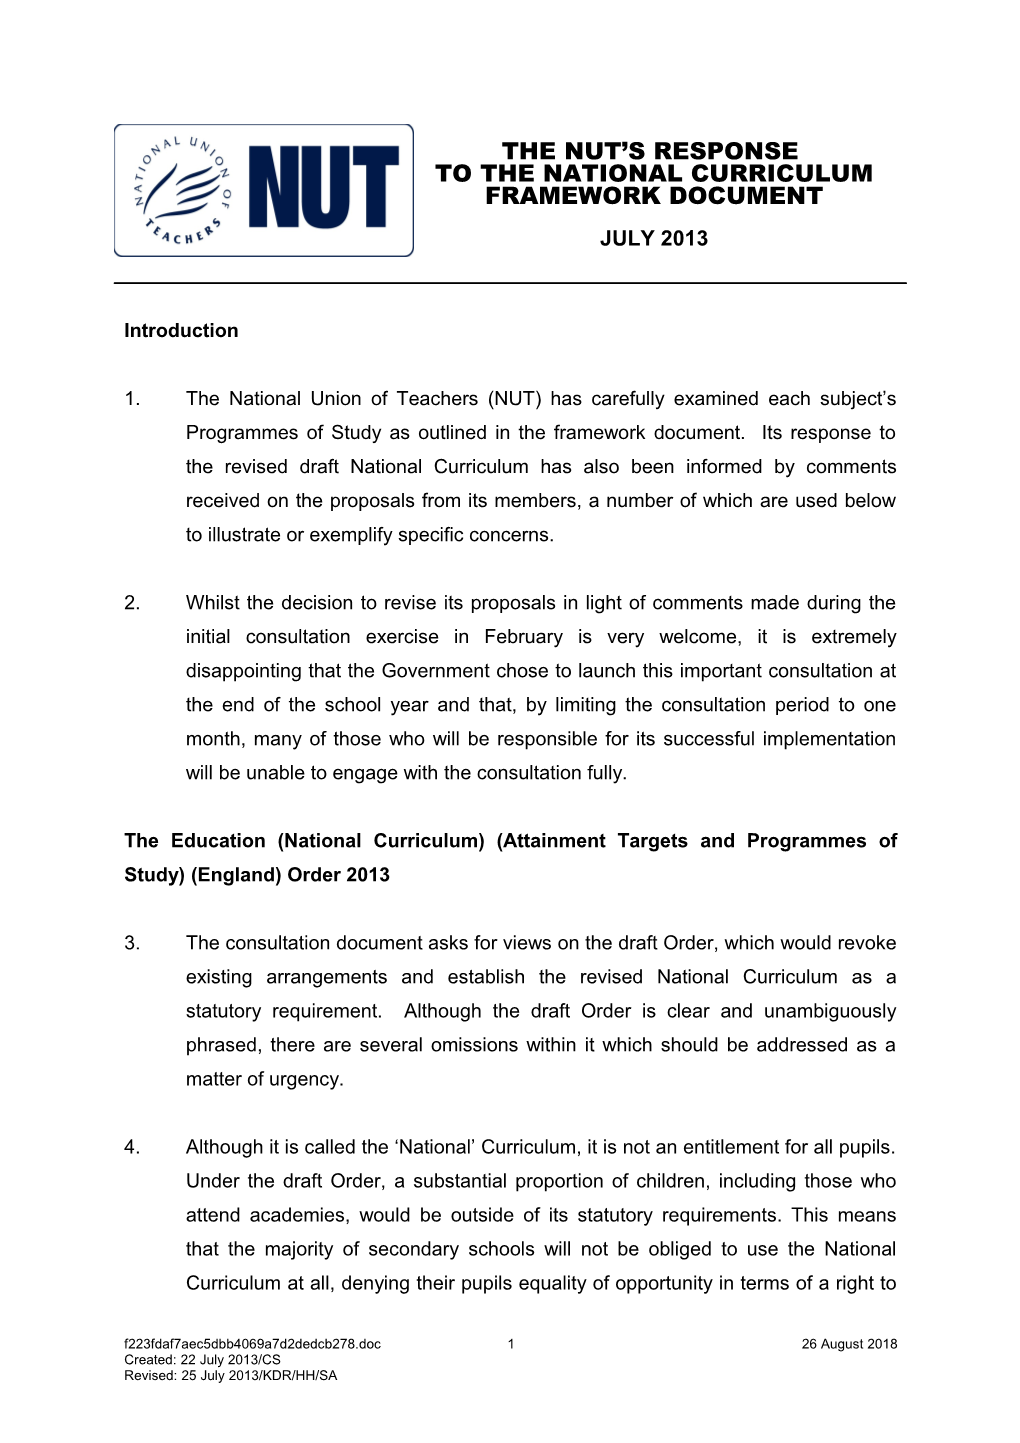 The Education (National Curriculum) (Attainment Targets and Programmes of Study) (England)